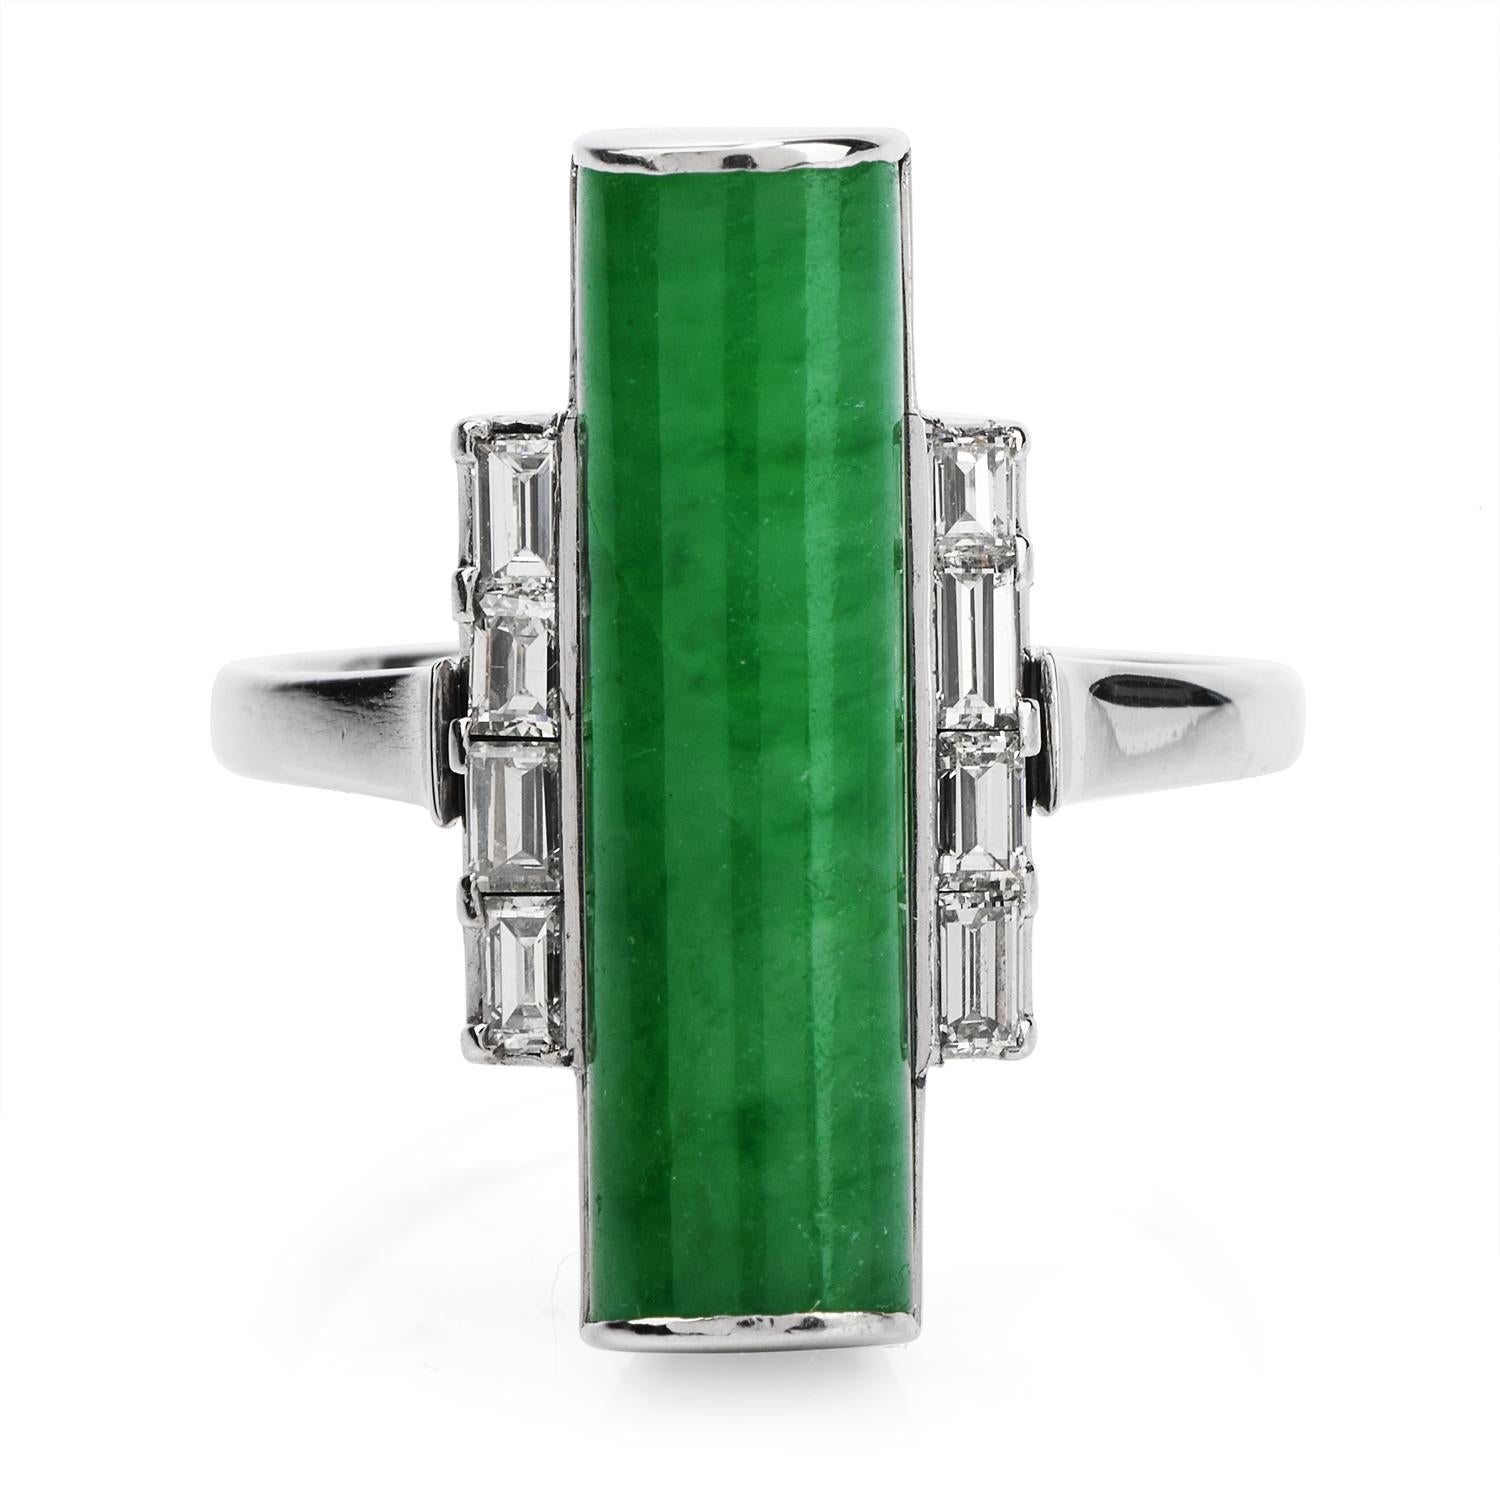 Deco Style Estate Bar Design Cocktail Ring!

This particular & interesting Cocktail Ring is Crafted in Solid Platinum,

weights 6.7 grams and the top measures 11 mm x 21 mm,

The center is a GIA Certified natural Jadeite Jade, Natural Color Cylinder